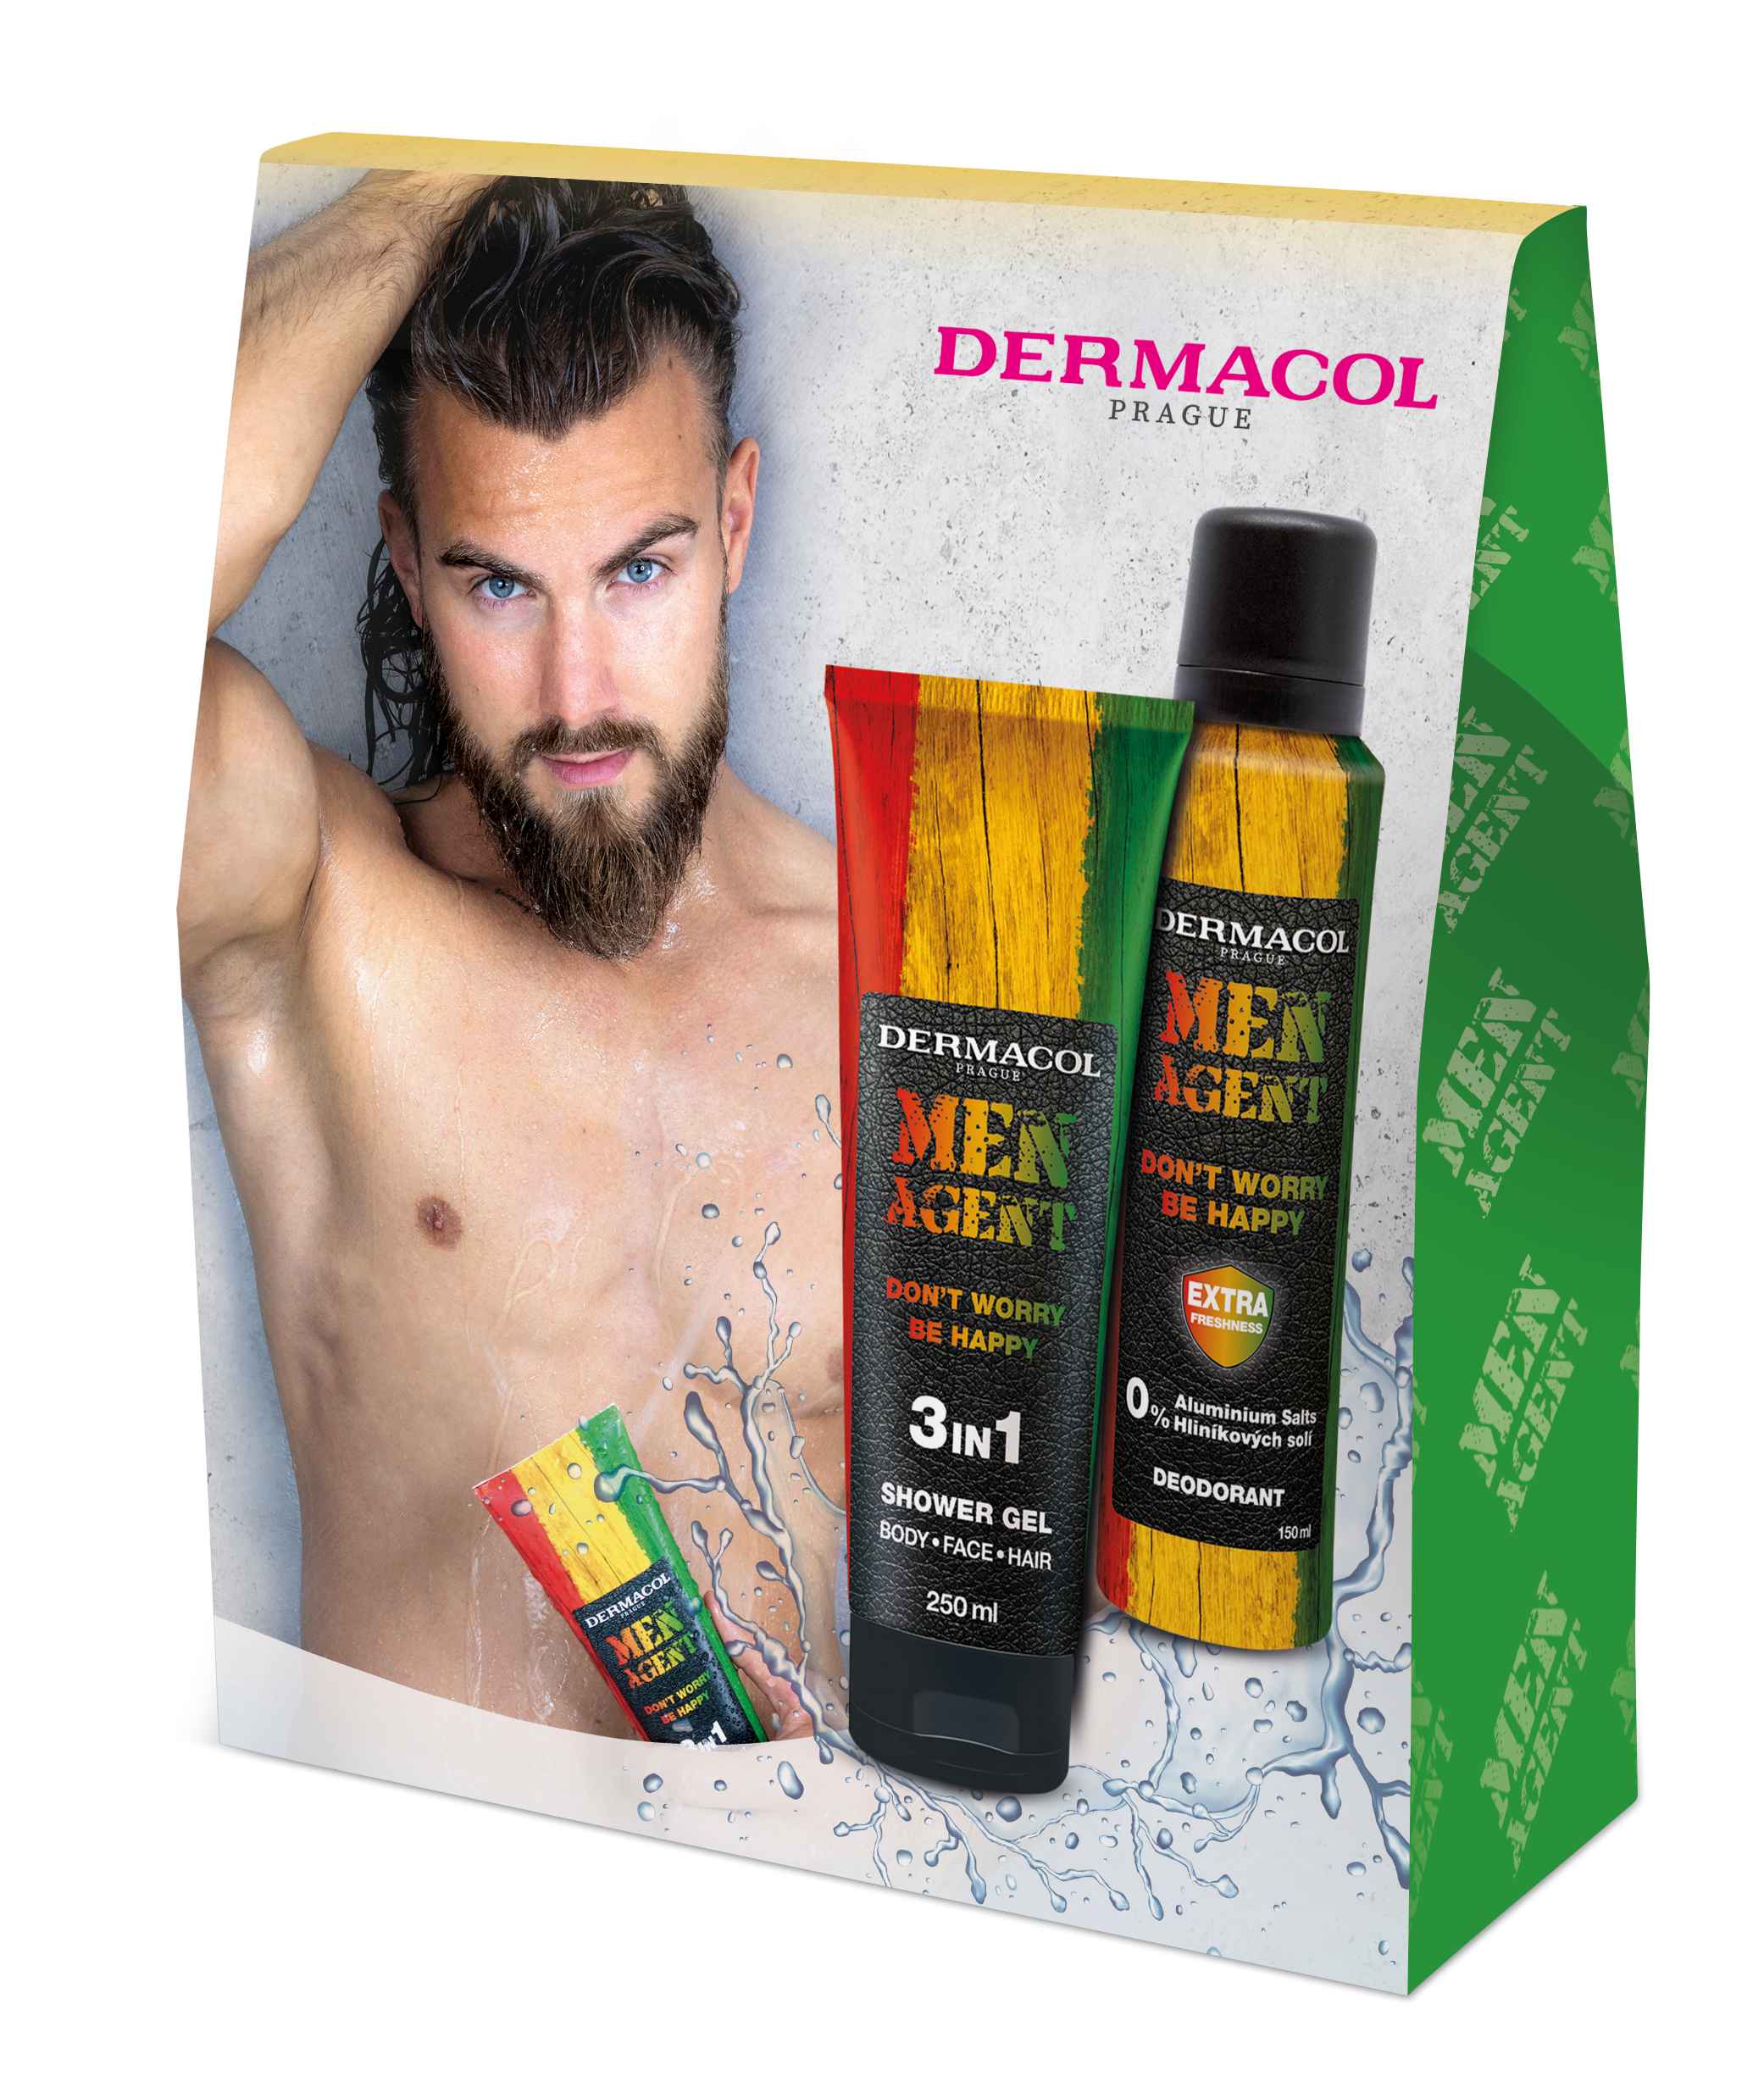 Dermacol Db Men Agent Don T Worry Be Happy Set